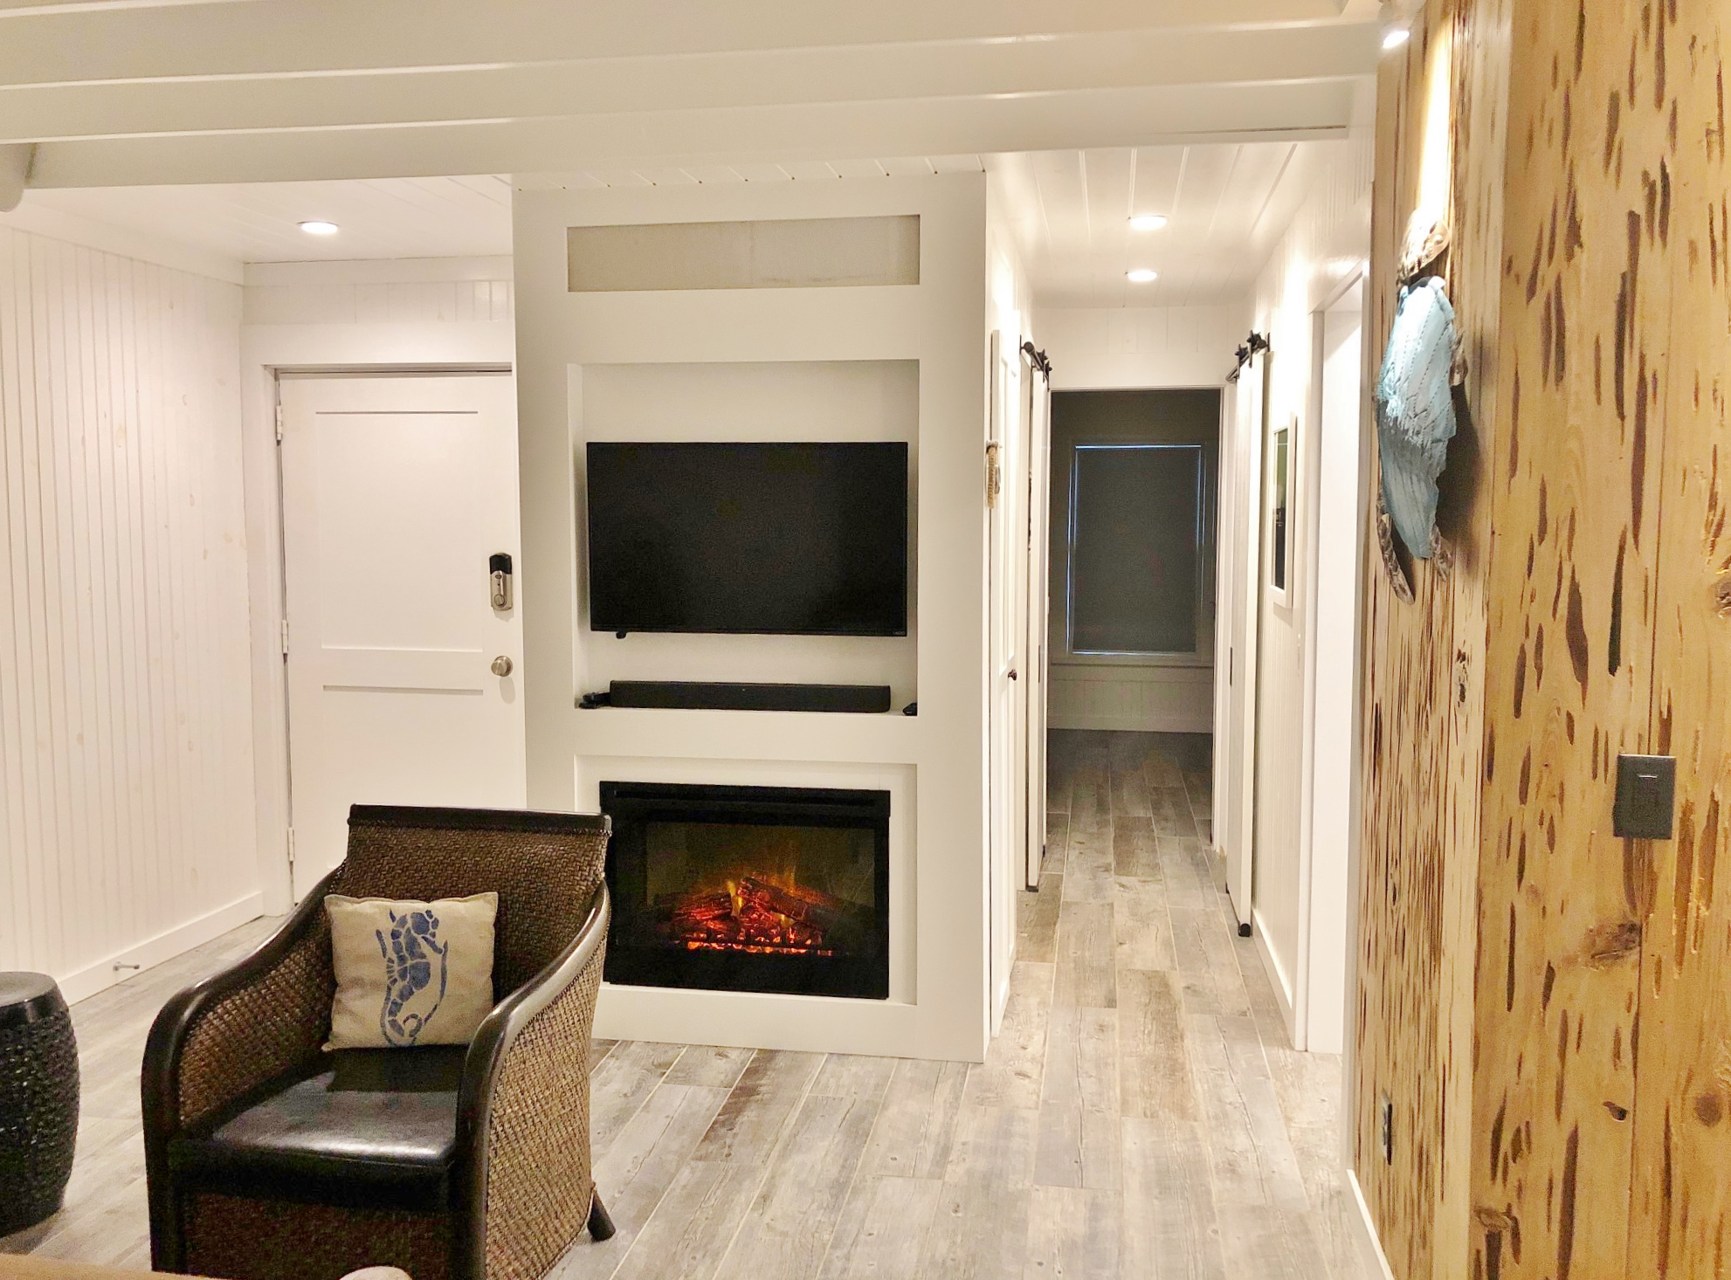 Electric Fire Place & TV